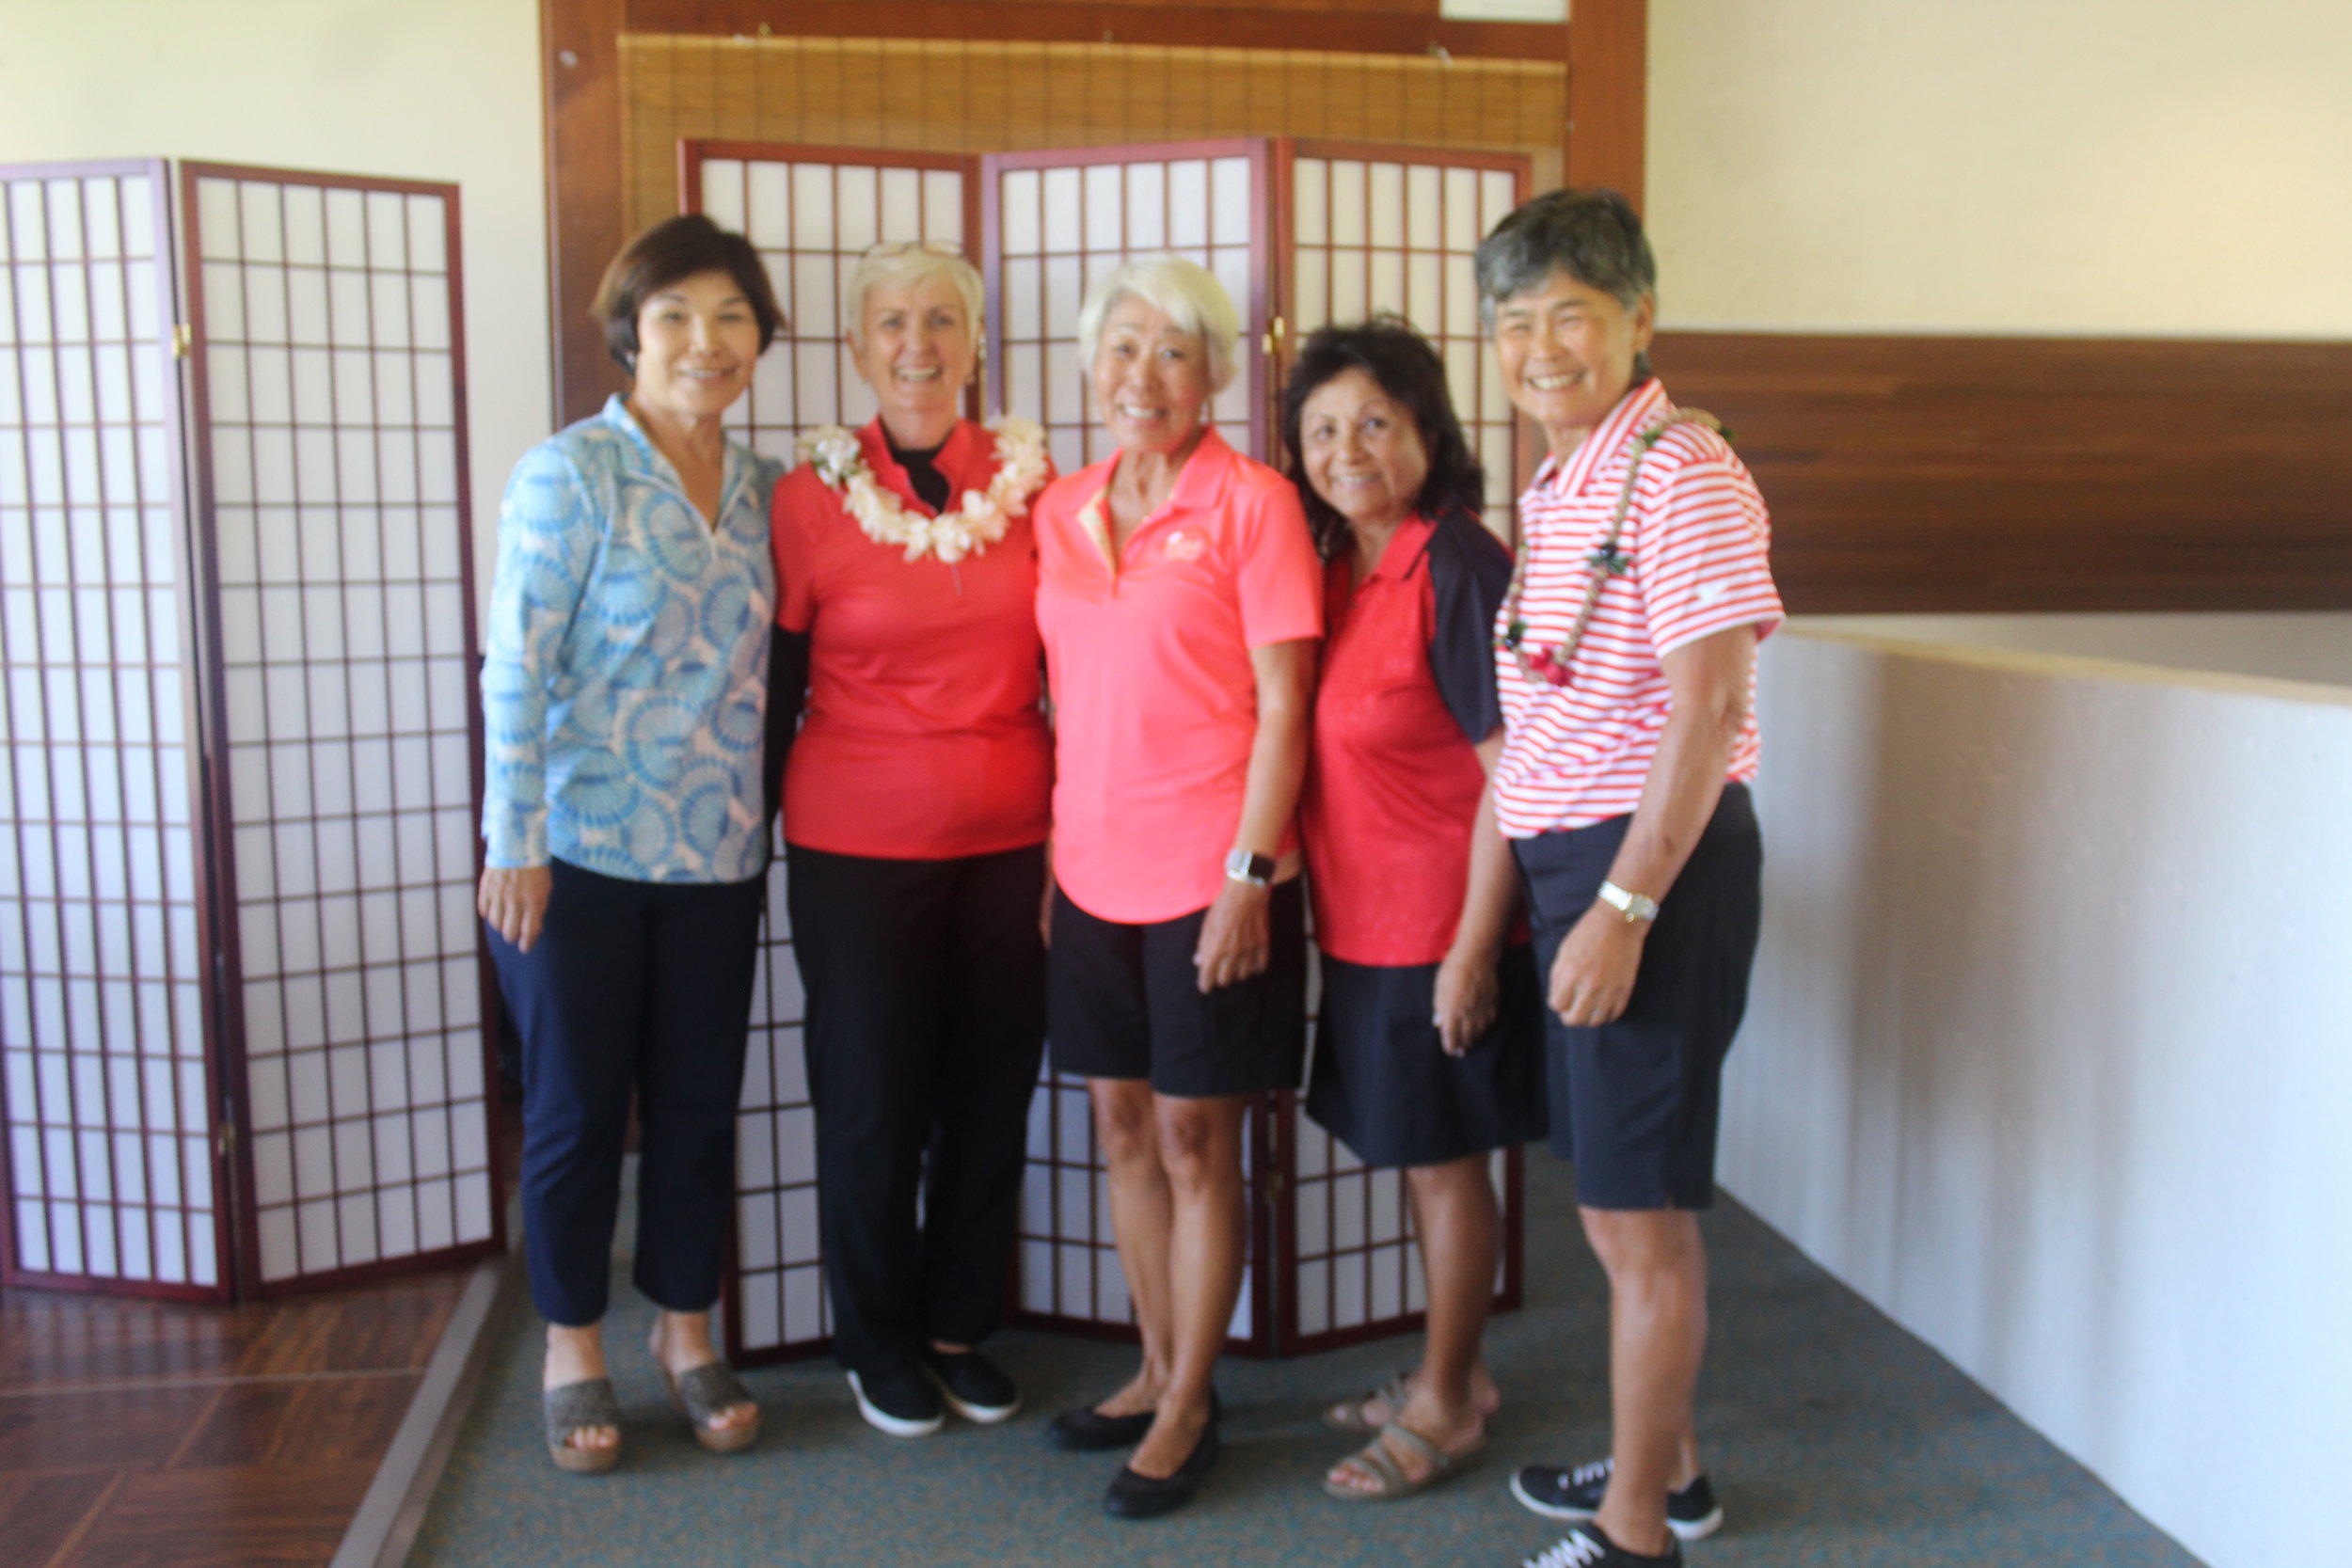  Some of our HSWGA board members:  (left to right) Gwen Omori, Barb Schroeder, Susan Church, Jeanette Takahashi, and Bev Kim. (missing: Kathy Ordway, Shera Hiam, Susan Fujiki, and Val Vares) 